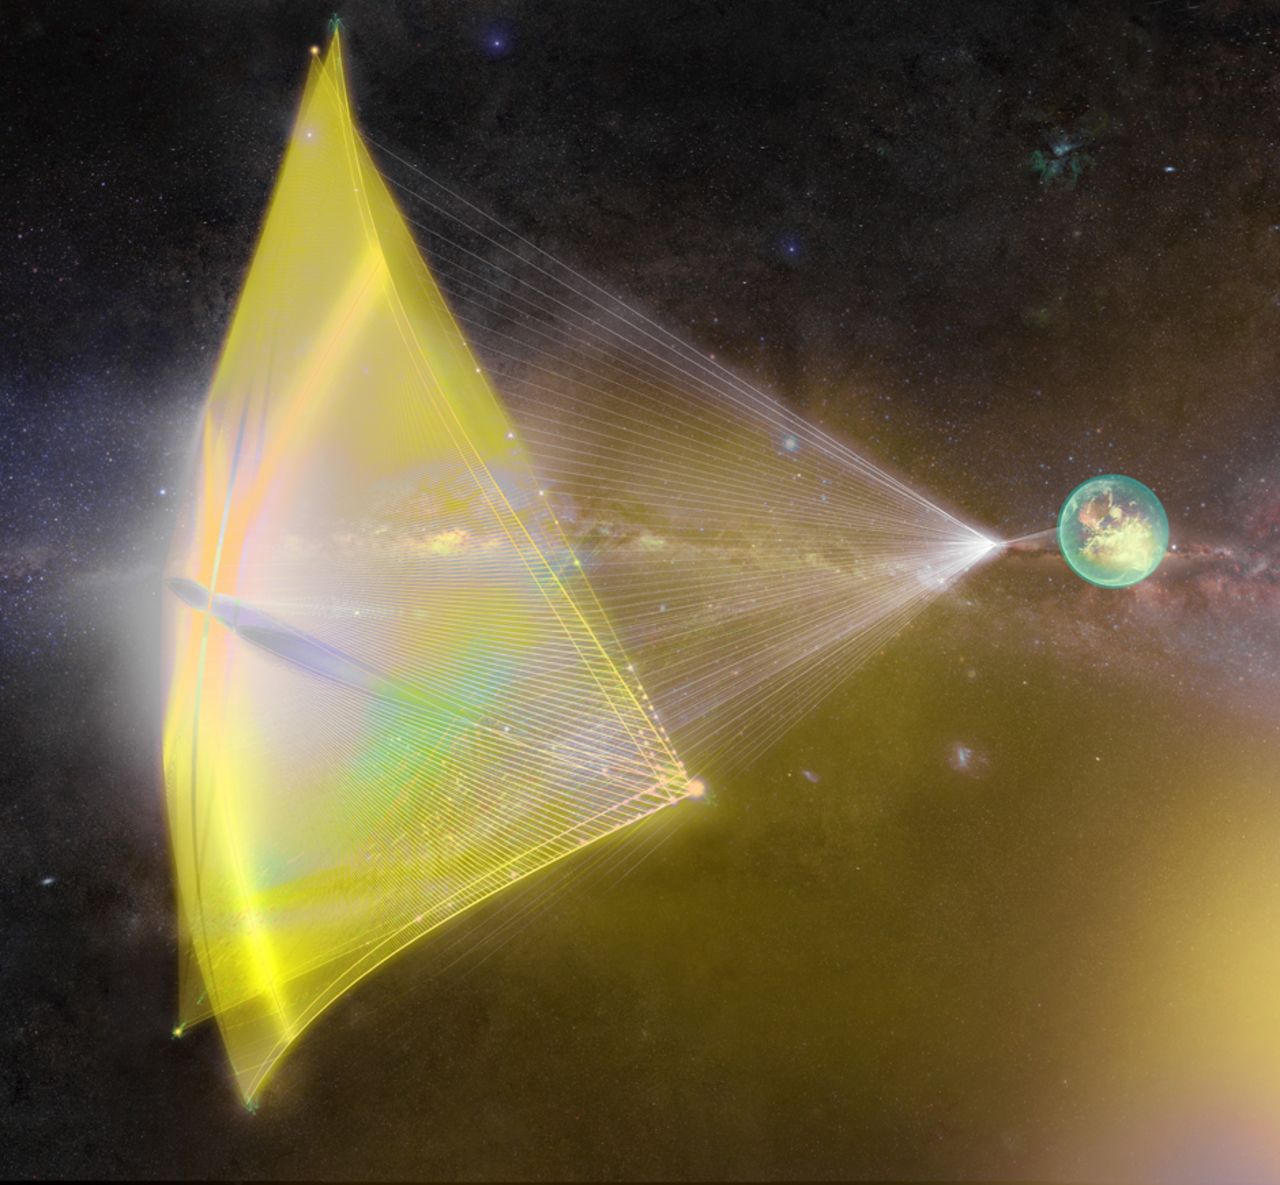 This illustration shows light beams from Earth pushing a tiny spacecraft's sail. The proposed Breakthrough <a href="https://edition.cnn.com/2016/04/12/us/breakthrough-starshot-space-probe-stephen-hawking-feat/index.html" target="_blank">Starshot project </a>would send hundreds of "nanocraft" space probes 4.37 light years away -- at speeds of up to 100 million miles an hour -- to to explore Alpha Centauri, our nearest star system. Proposed in 2016, the ambitious project is many years away from becoming reality.